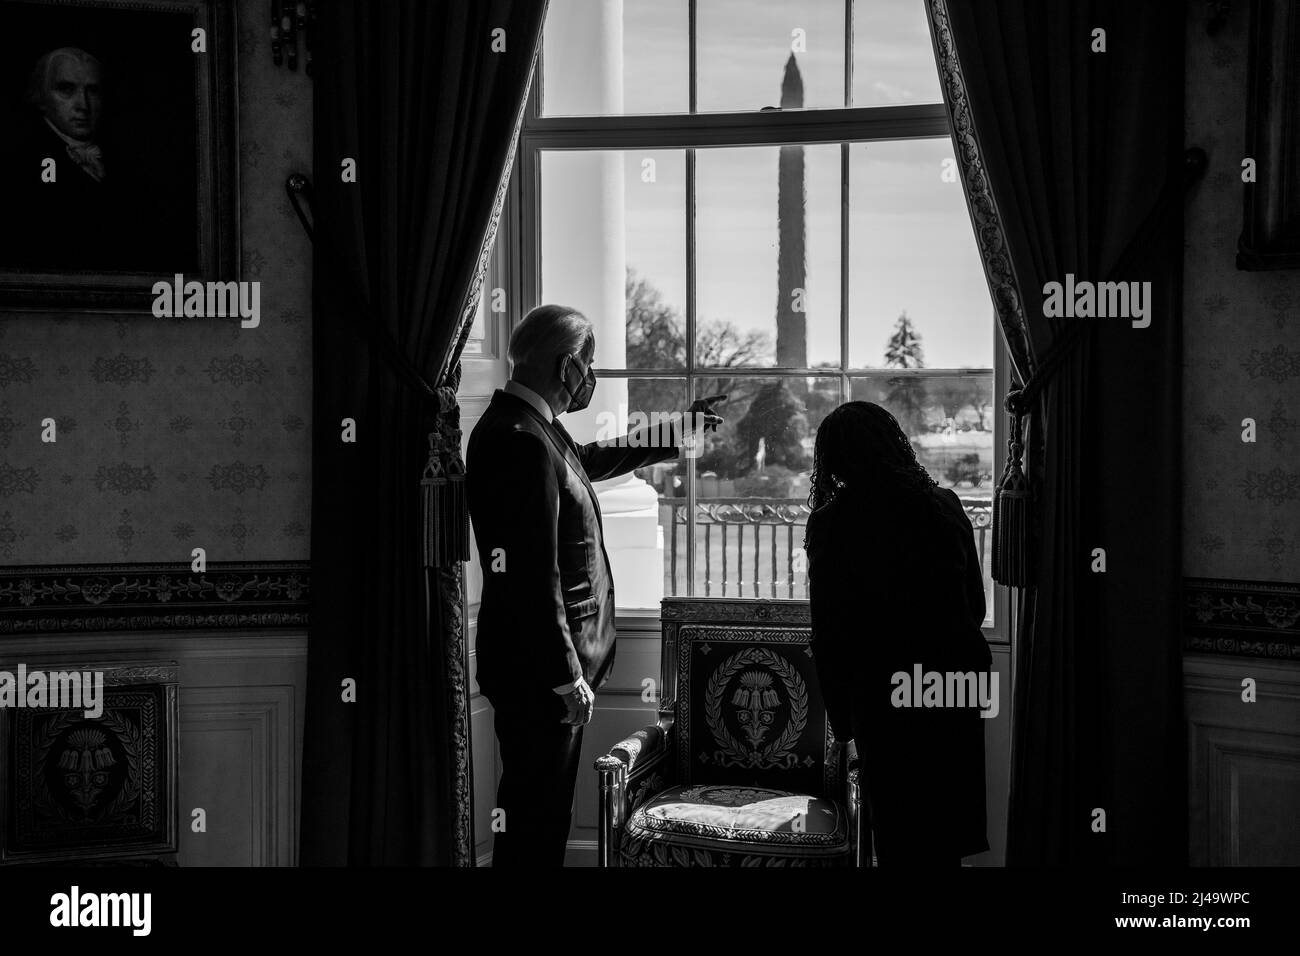 President Joe Biden looks out of the Blue Room window with Judge Ketanji Brown Jackson, Friday, February 25, 2022, prior to announcing her nomination to the U.S. Supreme Court. (Official White House Photo by Adam Schultz) Stock Photo